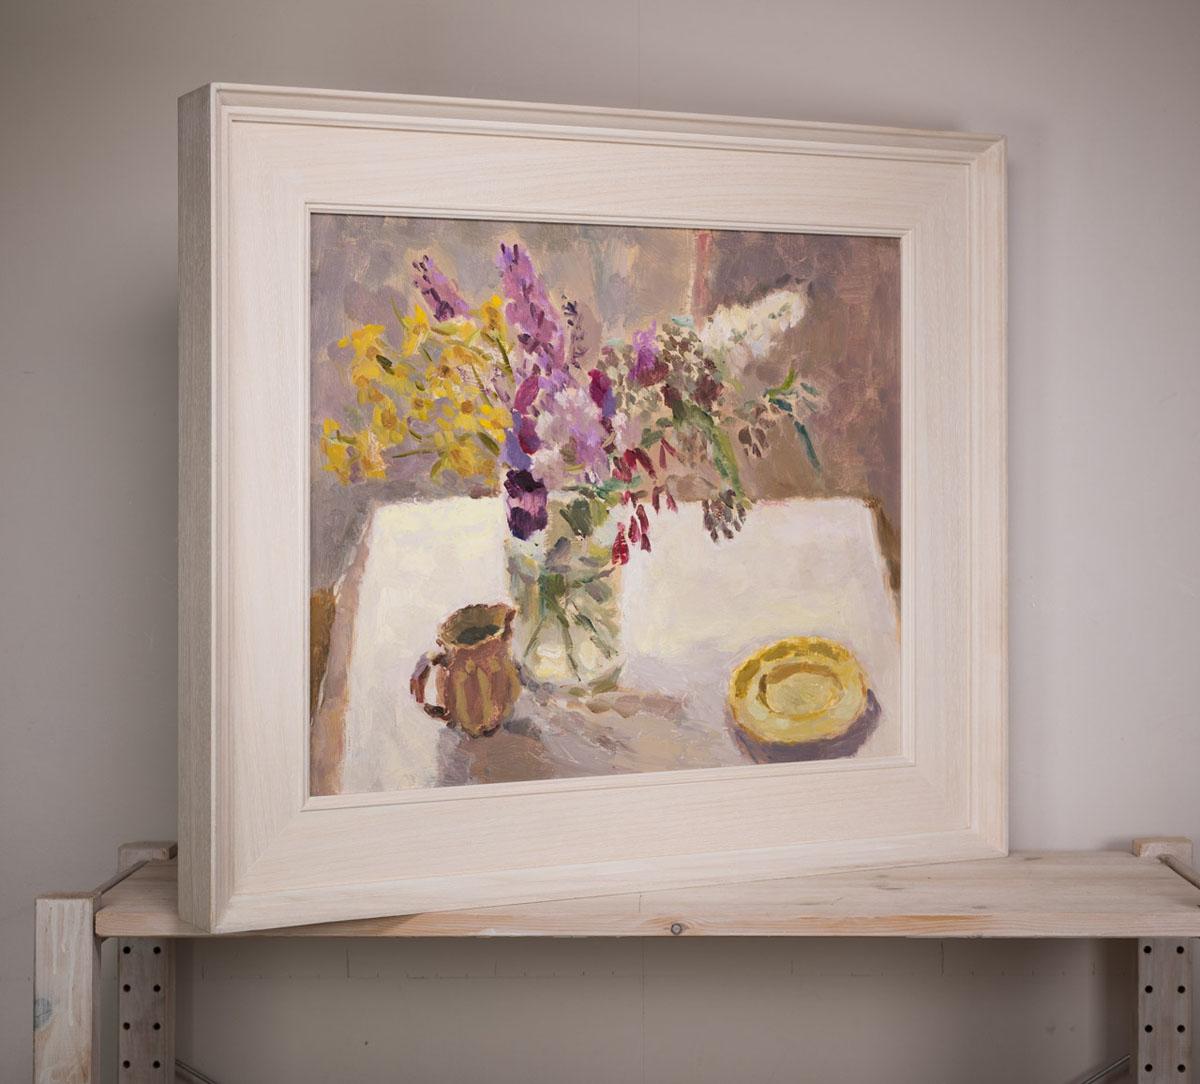 Summer garden flowers painted from life. Oil on Board. Width 53cm x Height 43.3cm x Depth .6cm (20.9 x 17 x .2 inches). Frame finish: white limed wood. External measurements: Width 69.3cm x Height 59.5cm x Depth 7cm (27.3 x 23.4 x 2.8 inches).